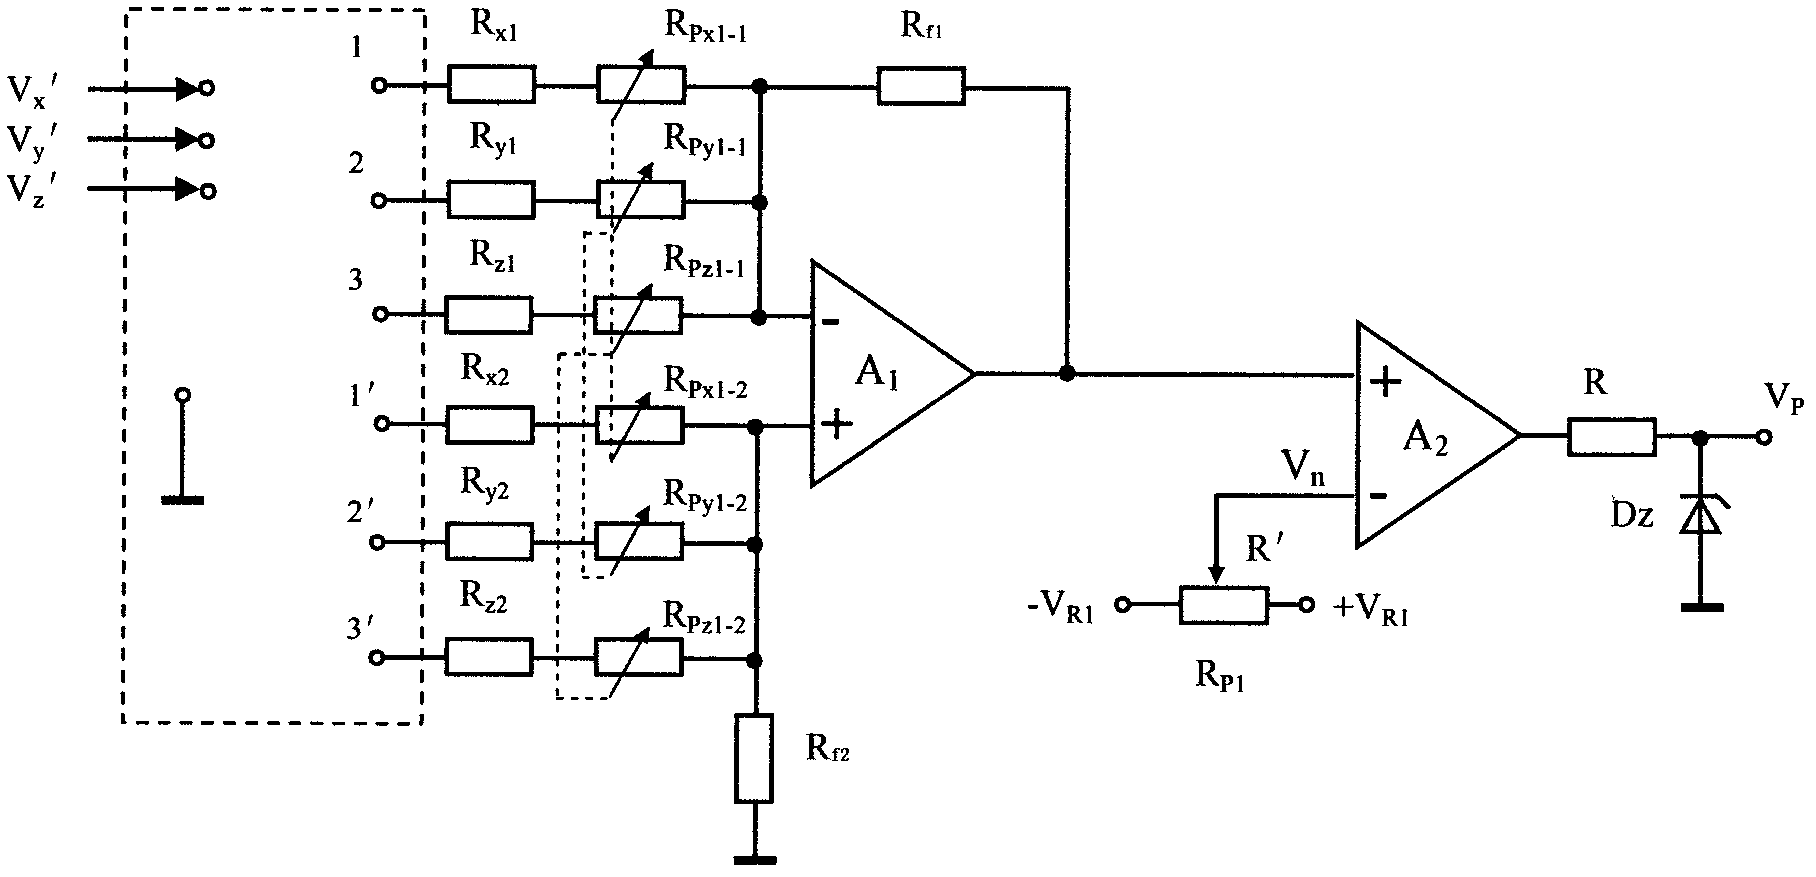 Circuit for displaying any Poincare section plane in three-dimensional space by using oscillograph